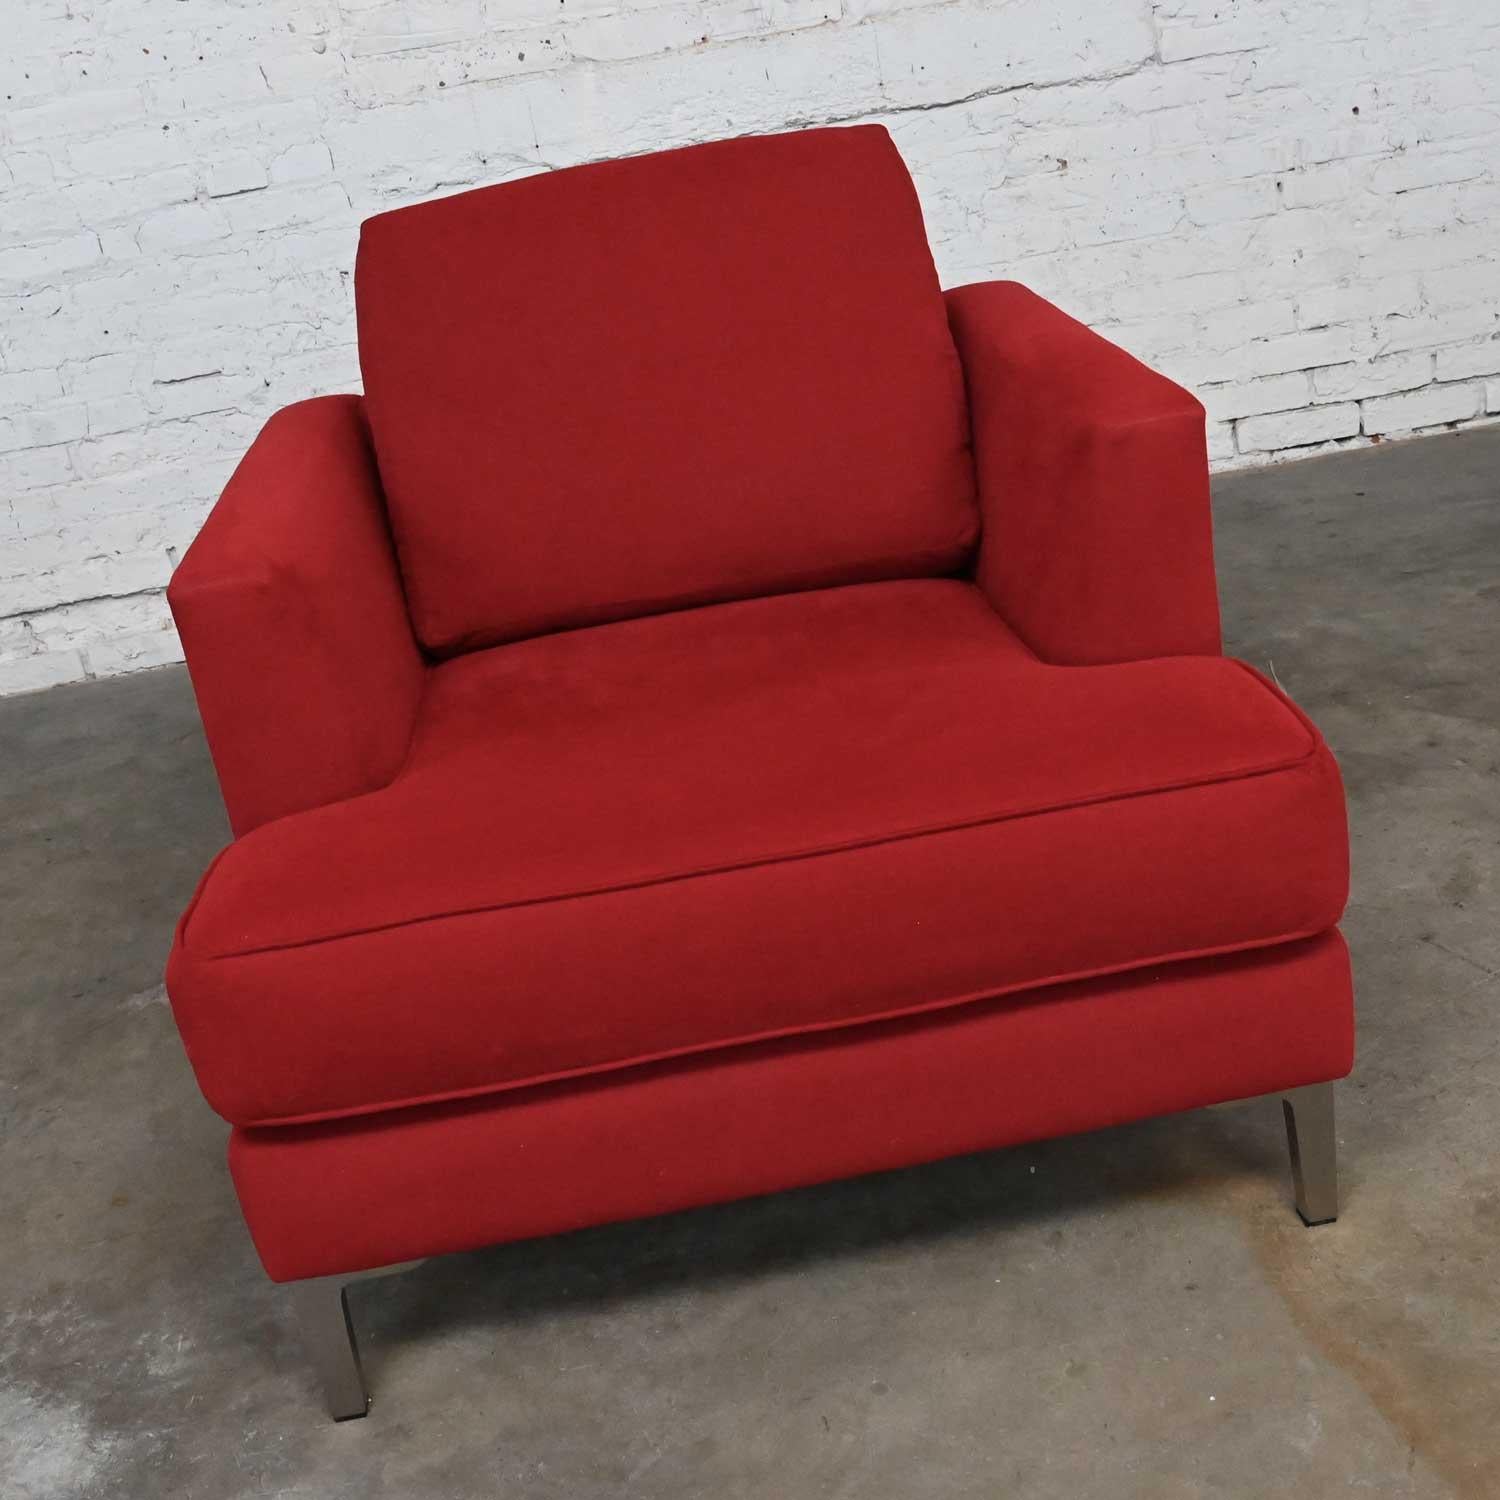 Modern Carter Club Chair Attr Zen Collection Bright Red with Polished Steel Legs For Sale 8